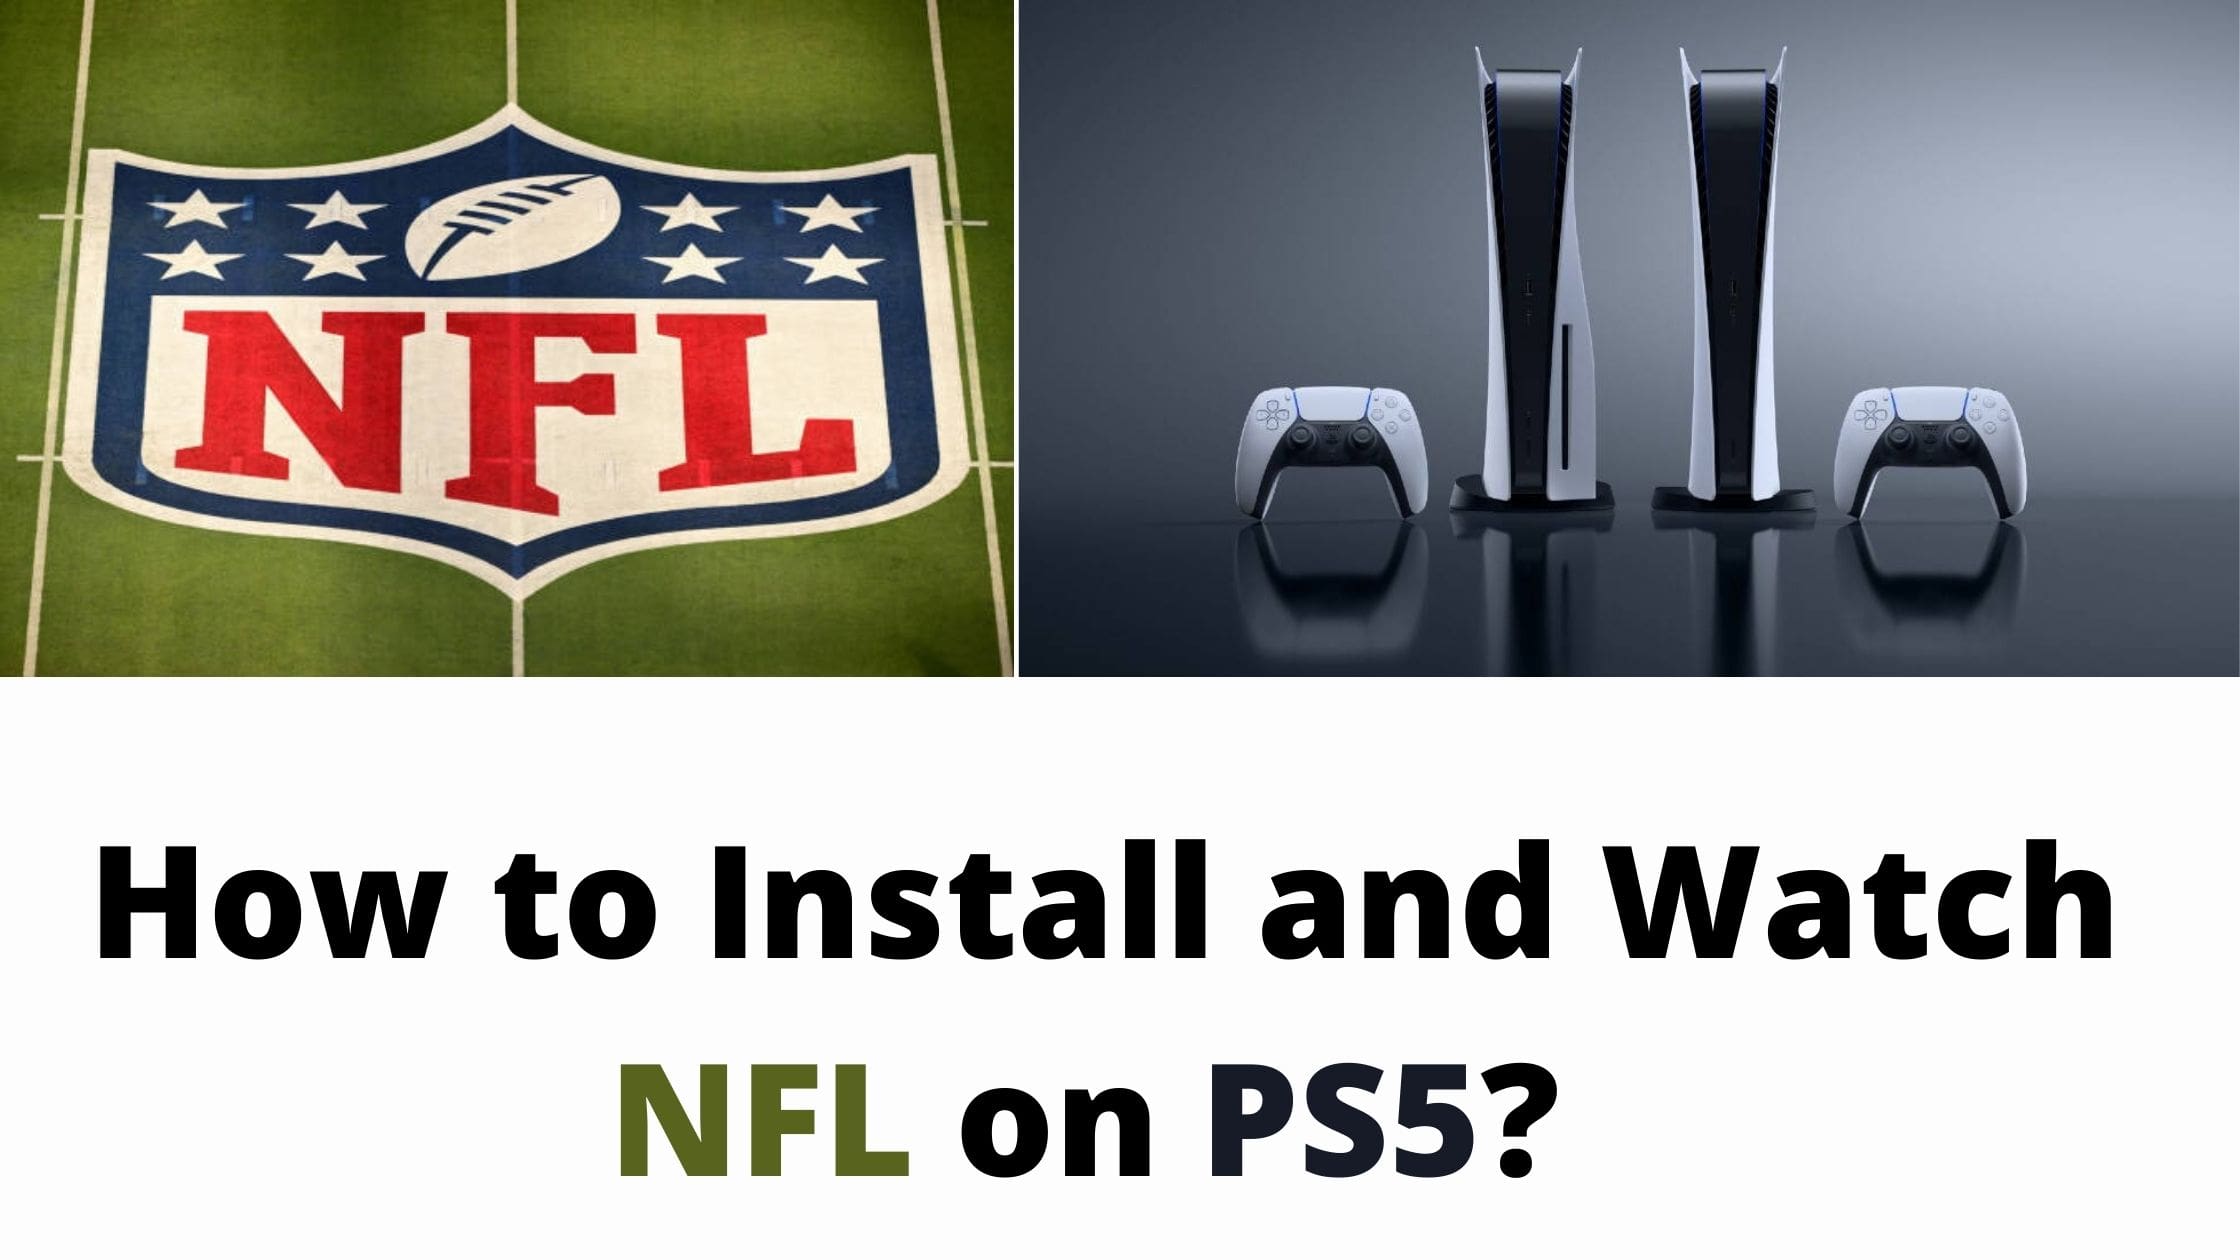 _How to Install and Watch NFL on PS5